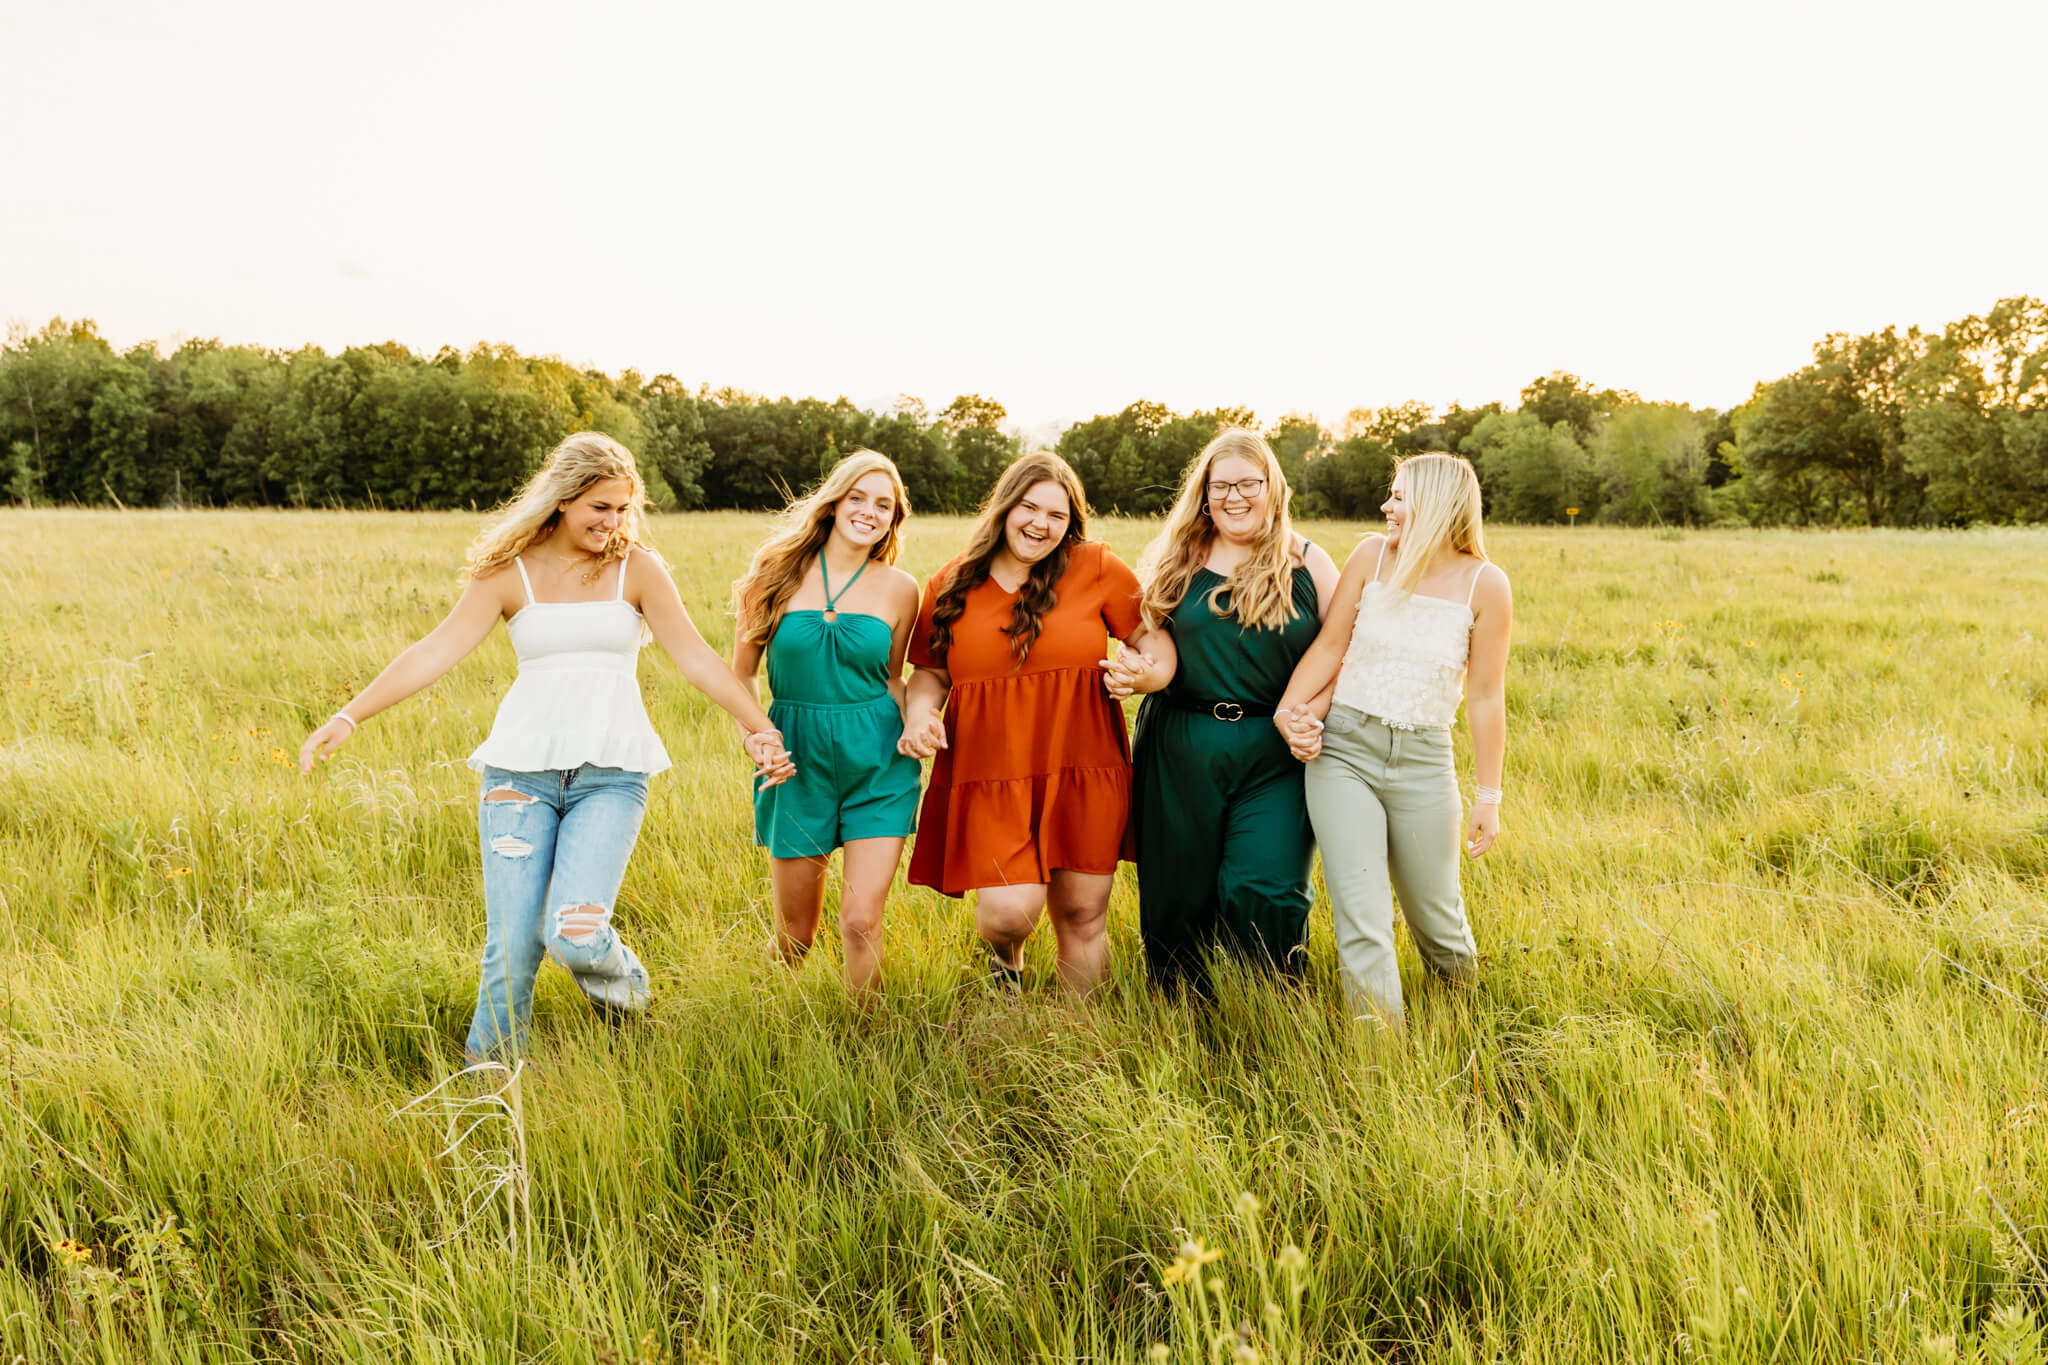 group of teenage girls laughing together as they walk through a grassy field